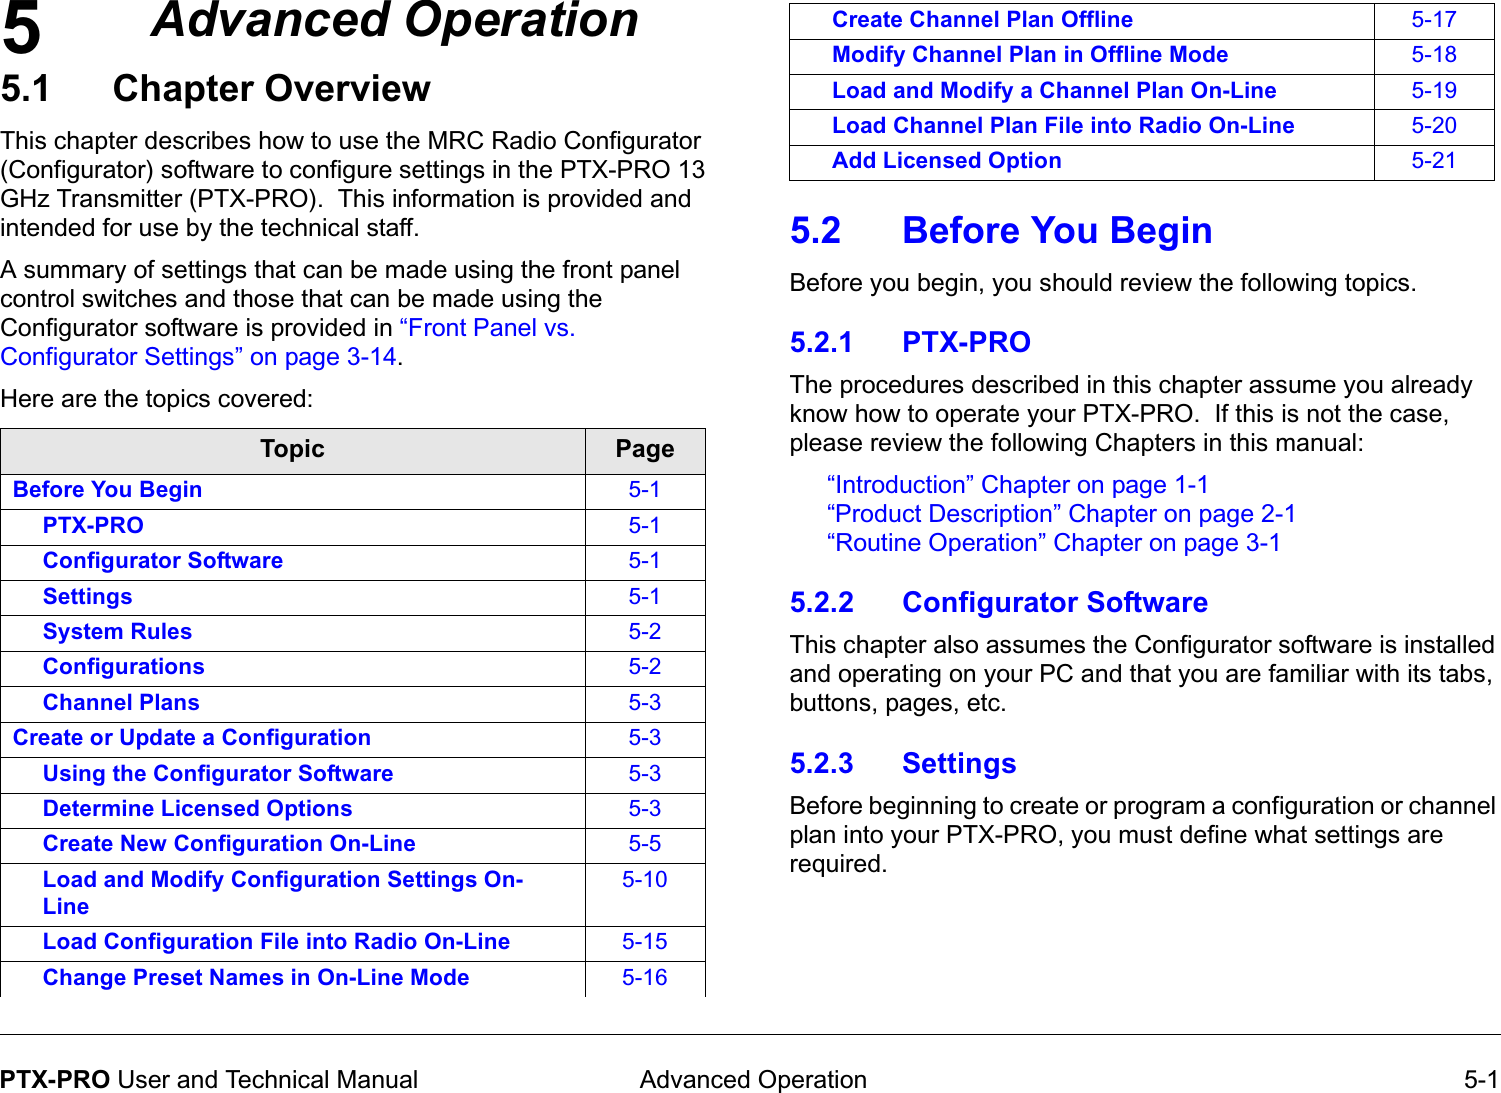 5 Advanced Operation 5-1PTX-PRO User and Technical ManualAdvanced Operation5.1 Chapter OverviewThis chapter describes how to use the MRC Radio Configurator (Configurator) software to configure settings in the PTX-PRO 13 GHz Transmitter (PTX-PRO).  This information is provided and intended for use by the technical staff. A summary of settings that can be made using the front panel control switches and those that can be made using the Configurator software is provided in “Front Panel vs. Configurator Settings” on page 3-14.Here are the topics covered:Topic PageBefore You Begin 5-1PTX-PRO 5-1Configurator Software 5-1Settings 5-1System Rules 5-2Configurations 5-2Channel Plans 5-3Create or Update a Configuration 5-3Using the Configurator Software 5-3Determine Licensed Options 5-3Create New Configuration On-Line 5-5Load and Modify Configuration Settings On- Line5-10Load Configuration File into Radio On-Line 5-15Change Preset Names in On-Line Mode 5-165.2 Before You BeginBefore you begin, you should review the following topics. 5.2.1 PTX-PRO The procedures described in this chapter assume you already know how to operate your PTX-PRO.  If this is not the case, please review the following Chapters in this manual:“Introduction” Chapter on page 1-1“Product Description” Chapter on page 2-1“Routine Operation” Chapter on page 3-1 5.2.2 Configurator SoftwareThis chapter also assumes the Configurator software is installed and operating on your PC and that you are familiar with its tabs, buttons, pages, etc.  5.2.3 SettingsBefore beginning to create or program a configuration or channel plan into your PTX-PRO, you must define what settings are required.  Create Channel Plan Offline 5-17Modify Channel Plan in Offline Mode 5-18Load and Modify a Channel Plan On-Line 5-19Load Channel Plan File into Radio On-Line 5-20Add Licensed Option 5-21